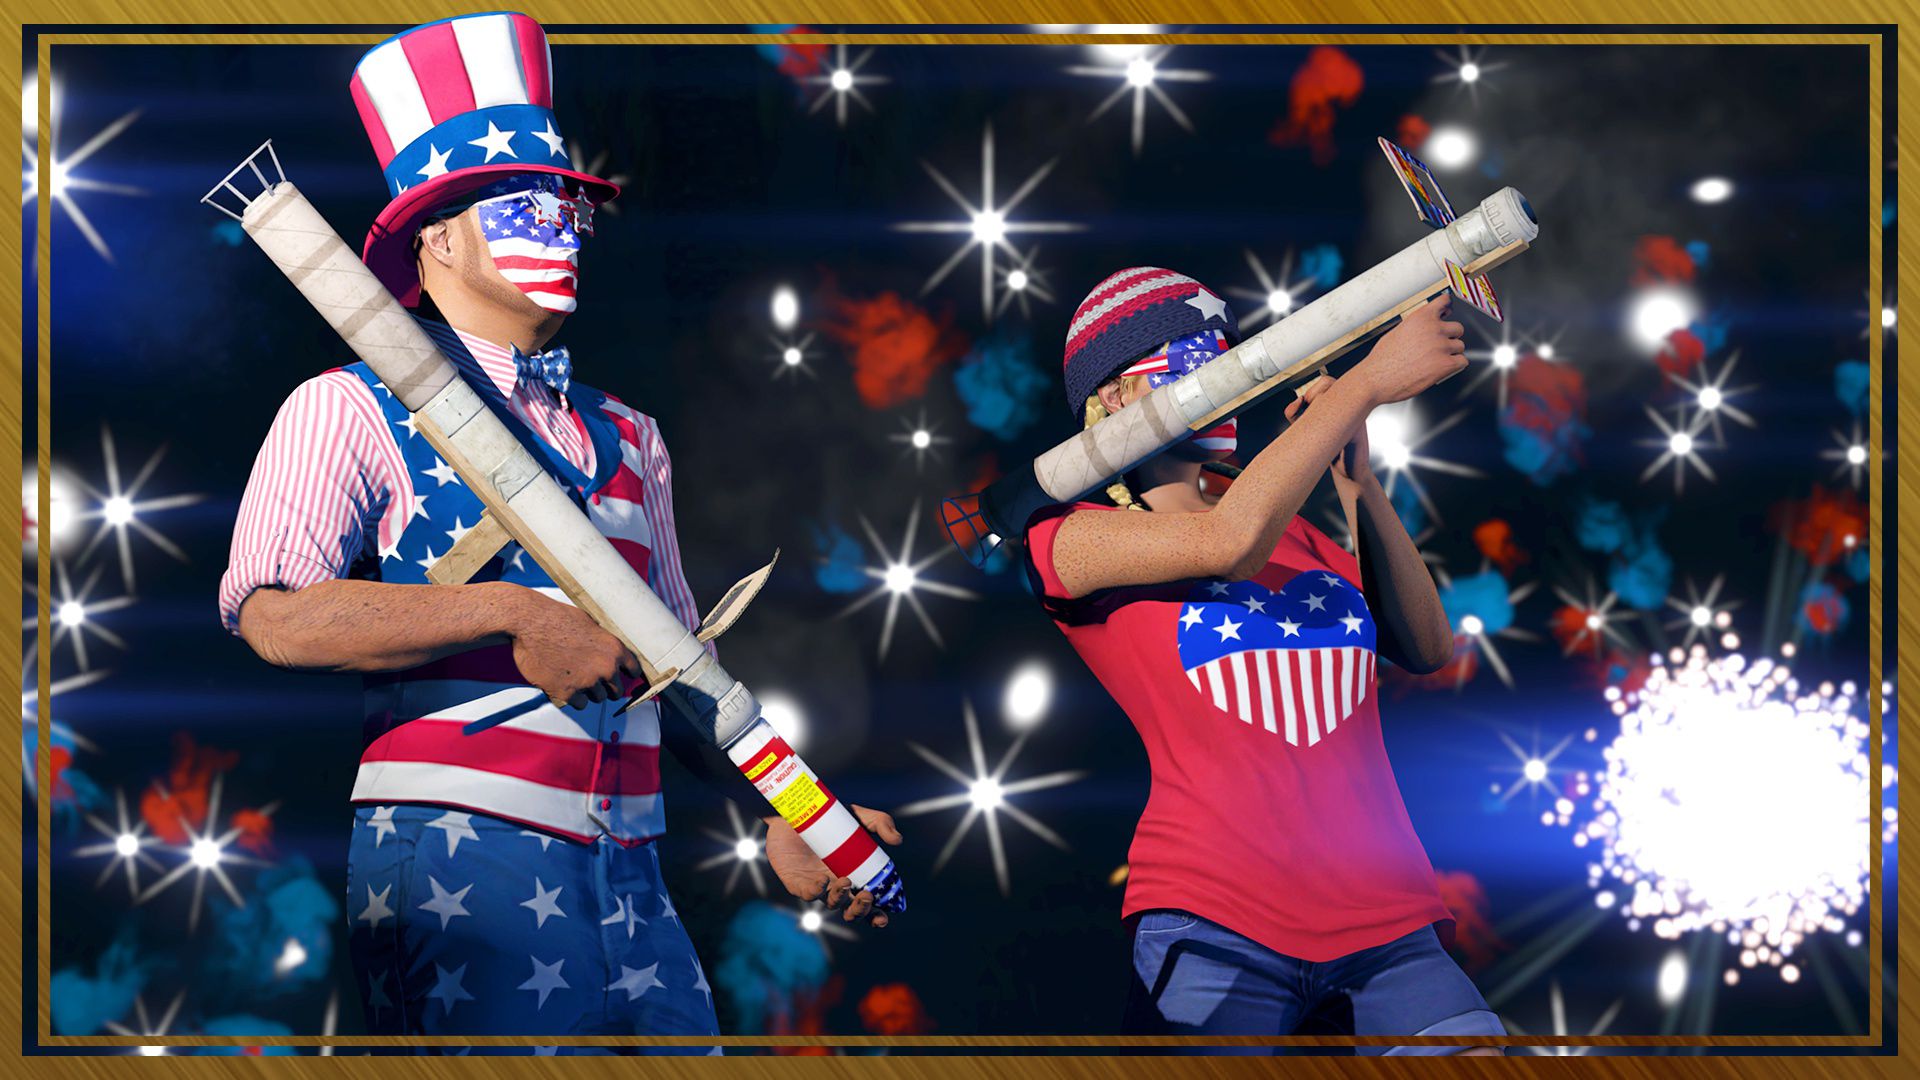 gta-online-gets-independence-day-discounts-rewards-and-more_dxtw.jpg